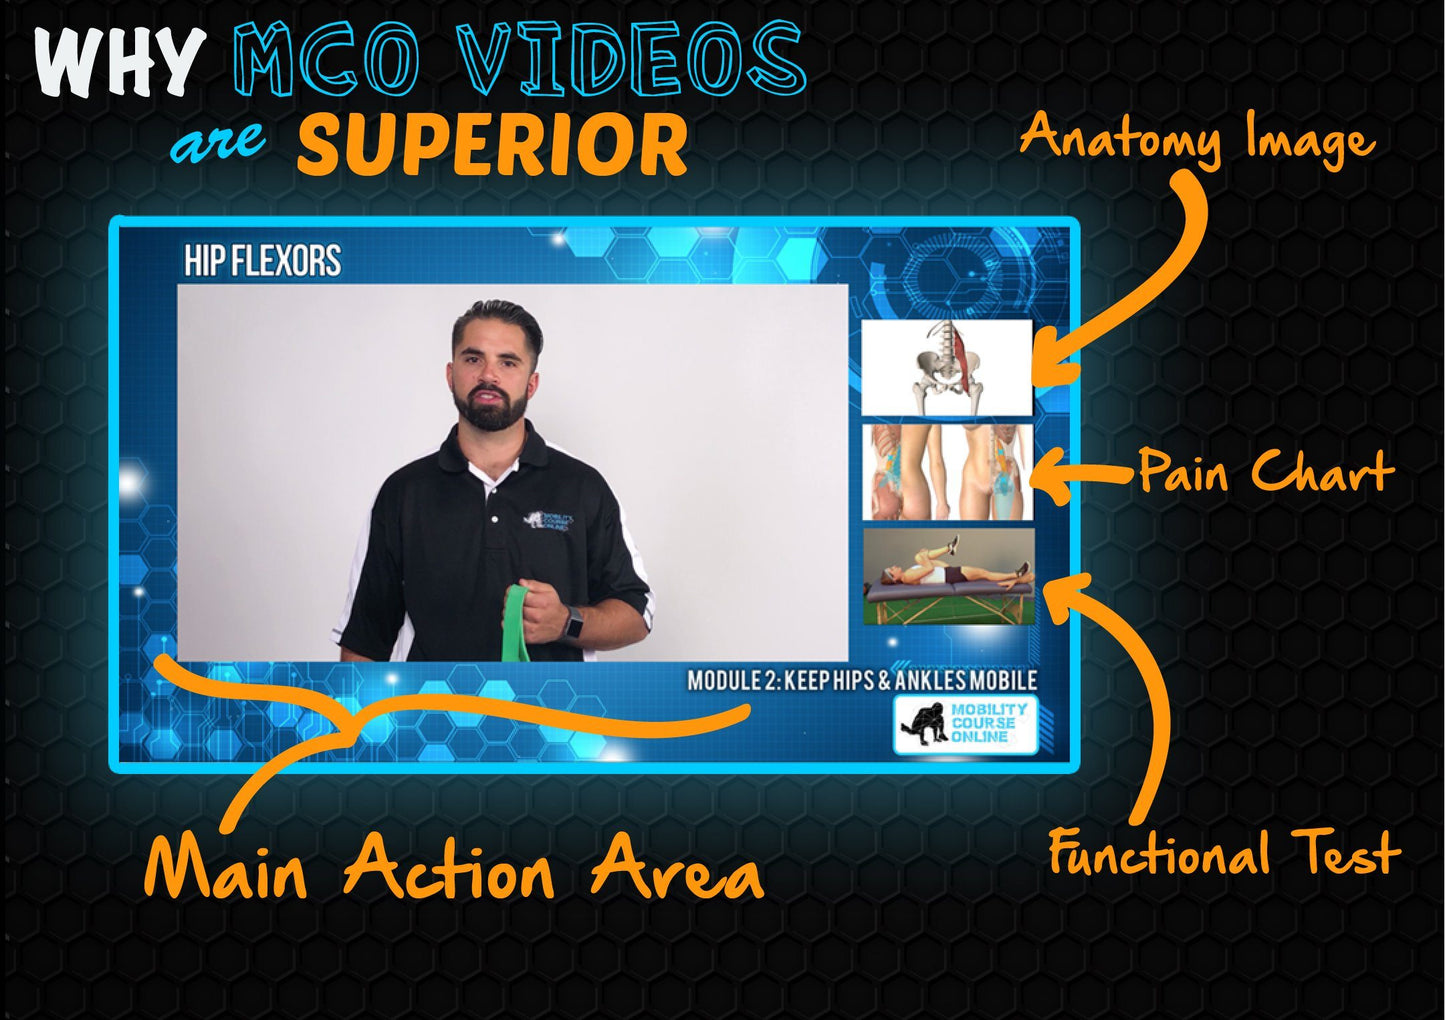 NEW! - Mobility Secrets Exposed - Online Course with Dr. Nick Chretien 